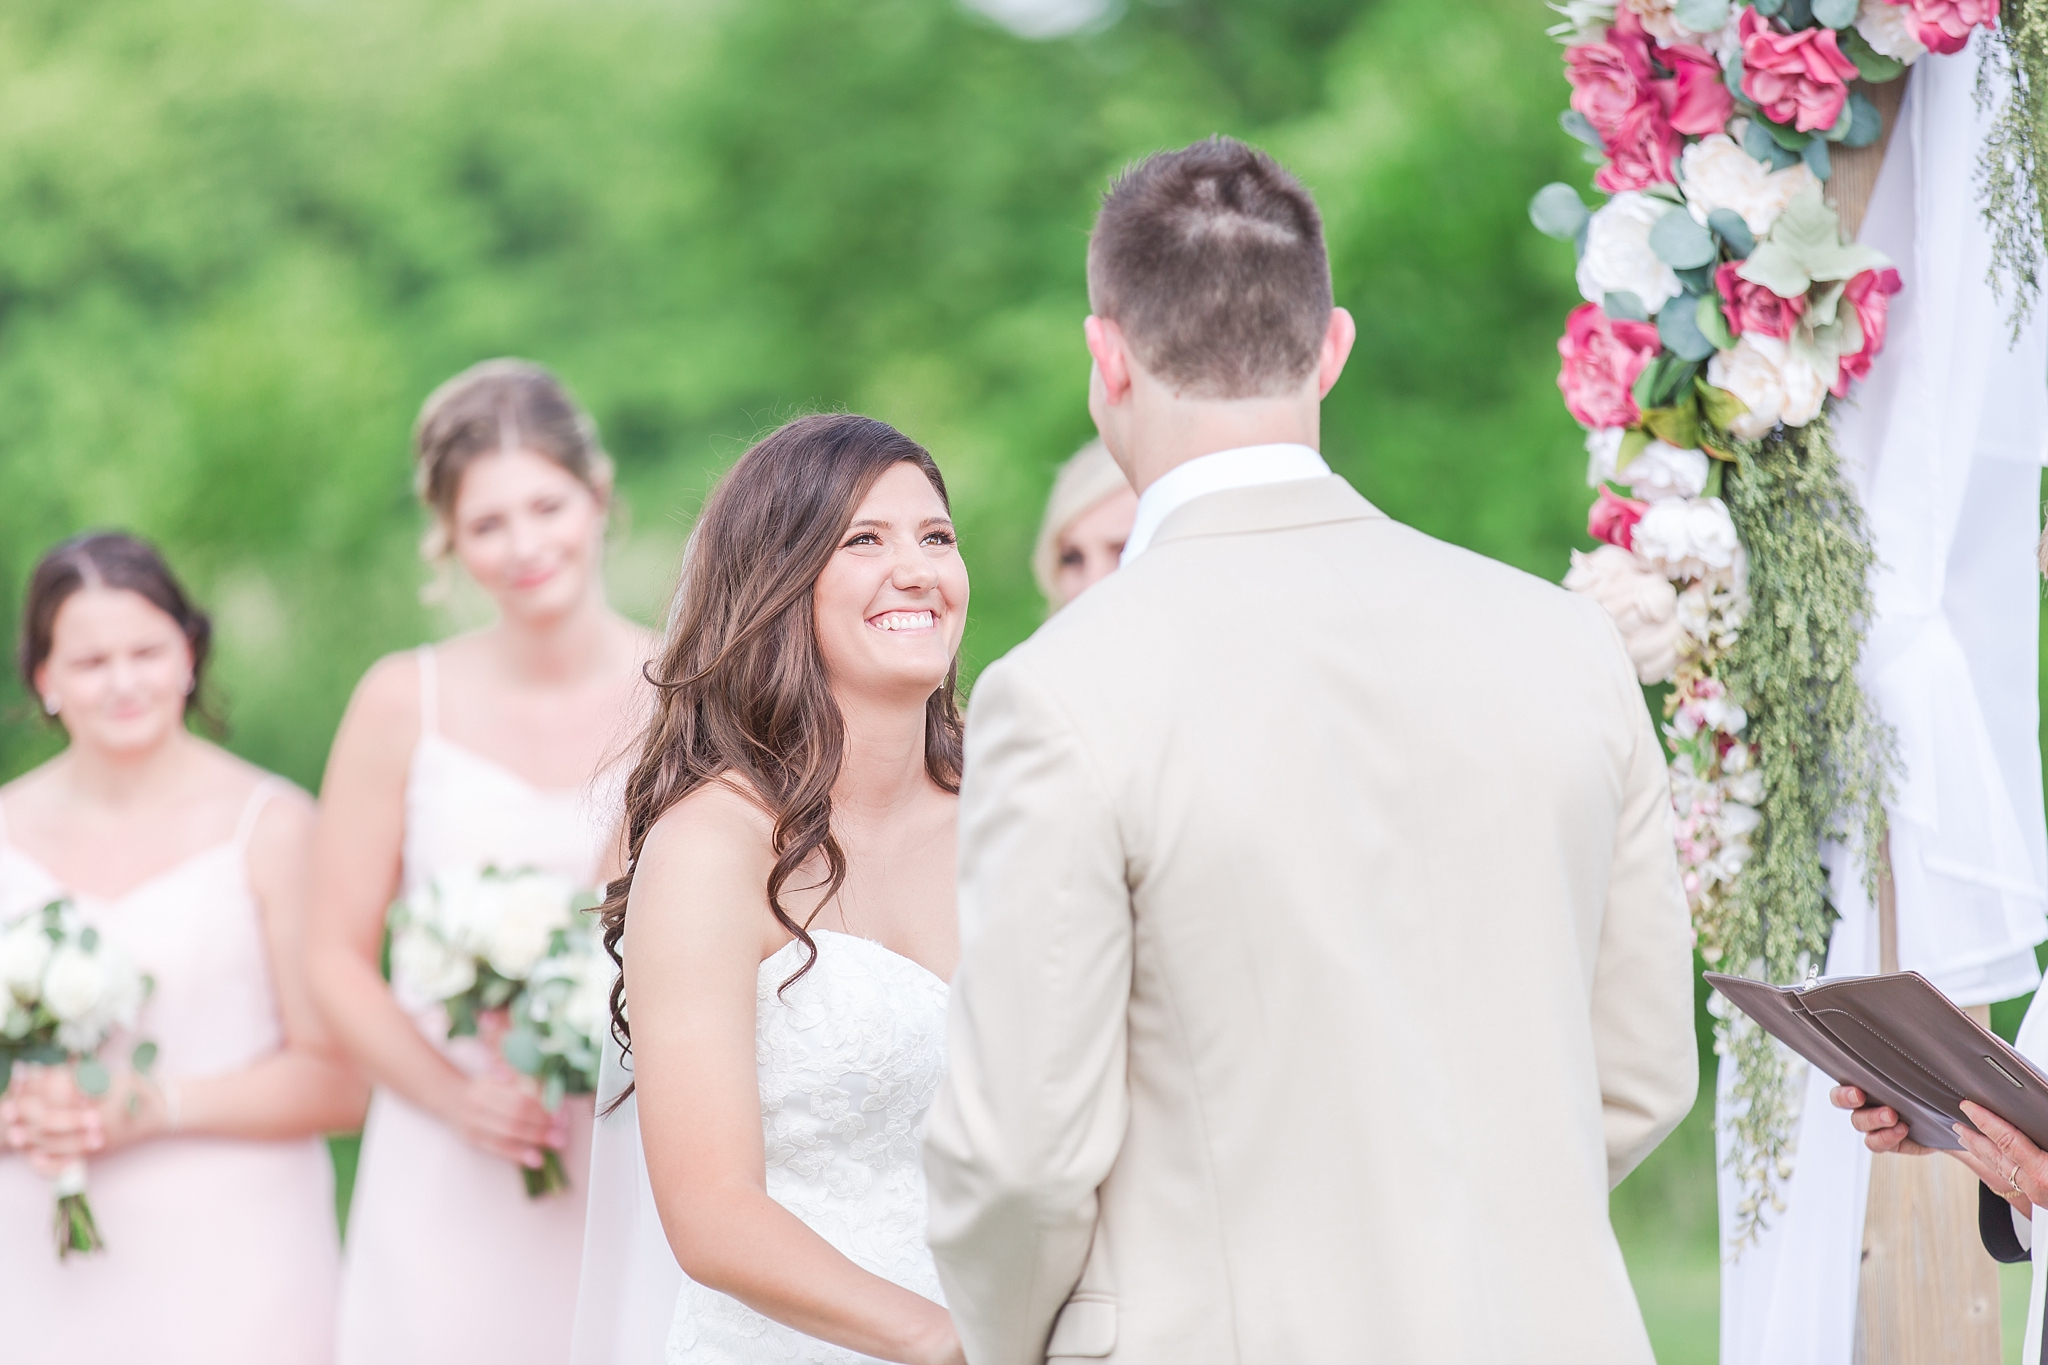 candid-timeless-wedding-photos-at-the-captains-club-in-grand-blanc-michigan-by-courtney-carolyn-photography_0042.jpg